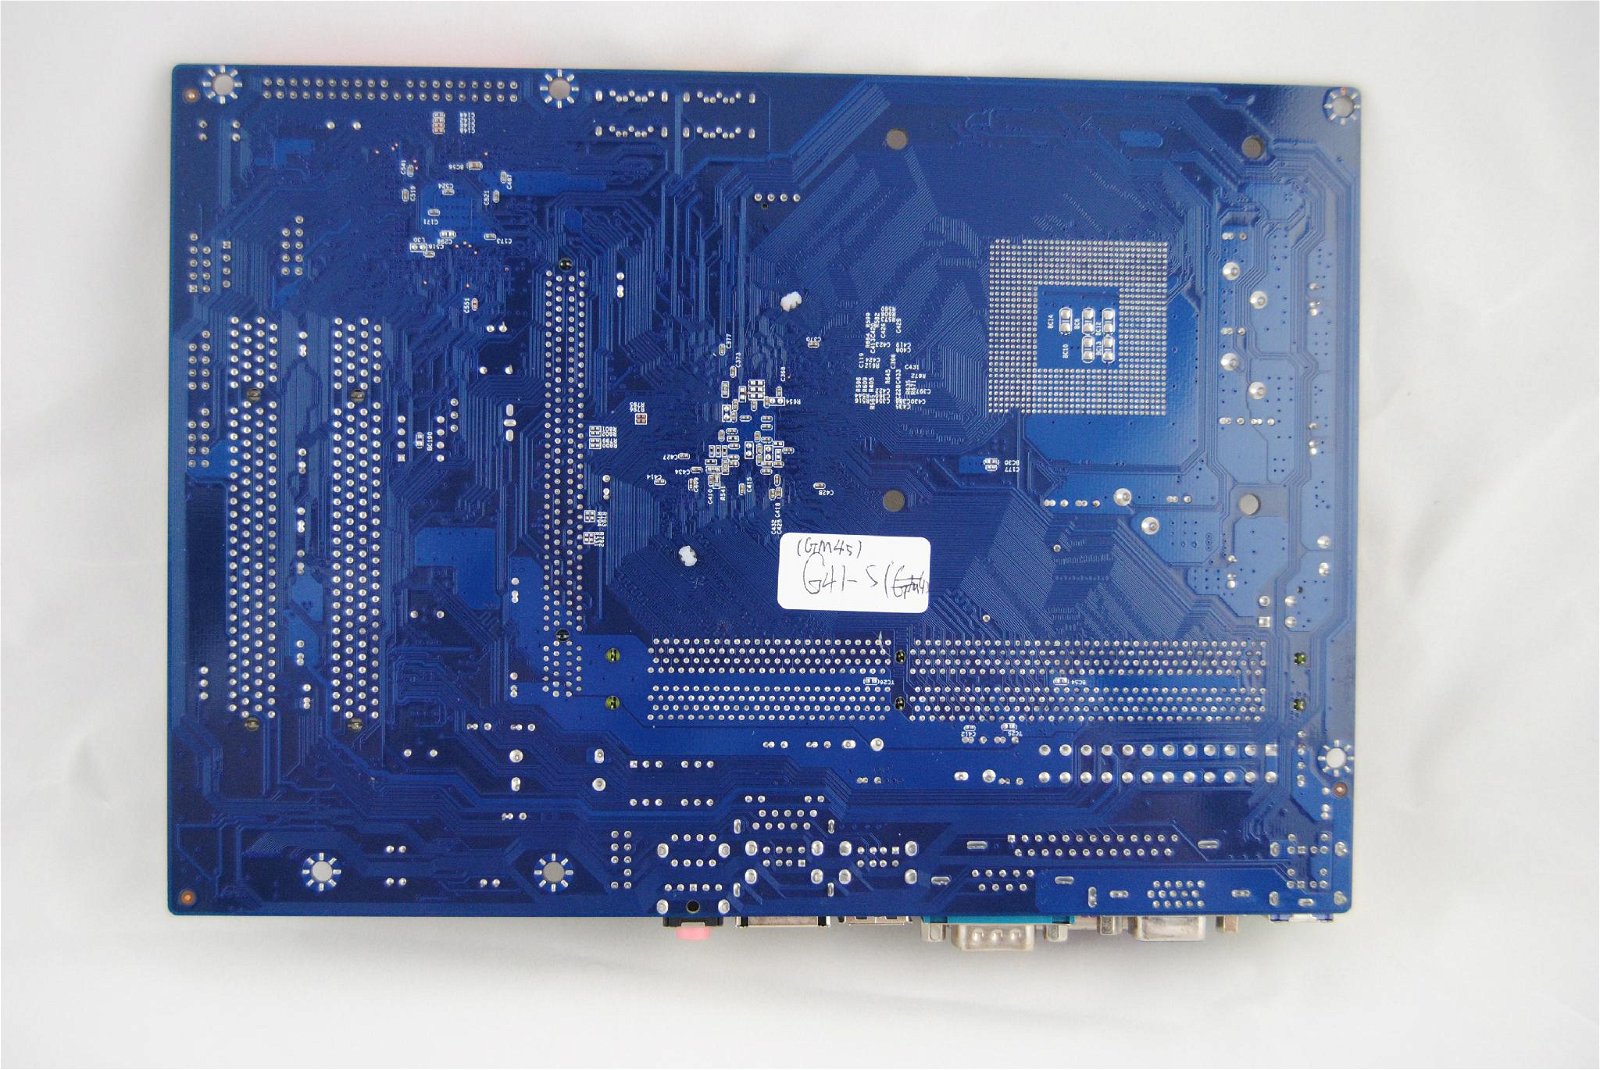 Integrated type dual core 1333mhz 1600mhz lga1150 H81 motherboard 4